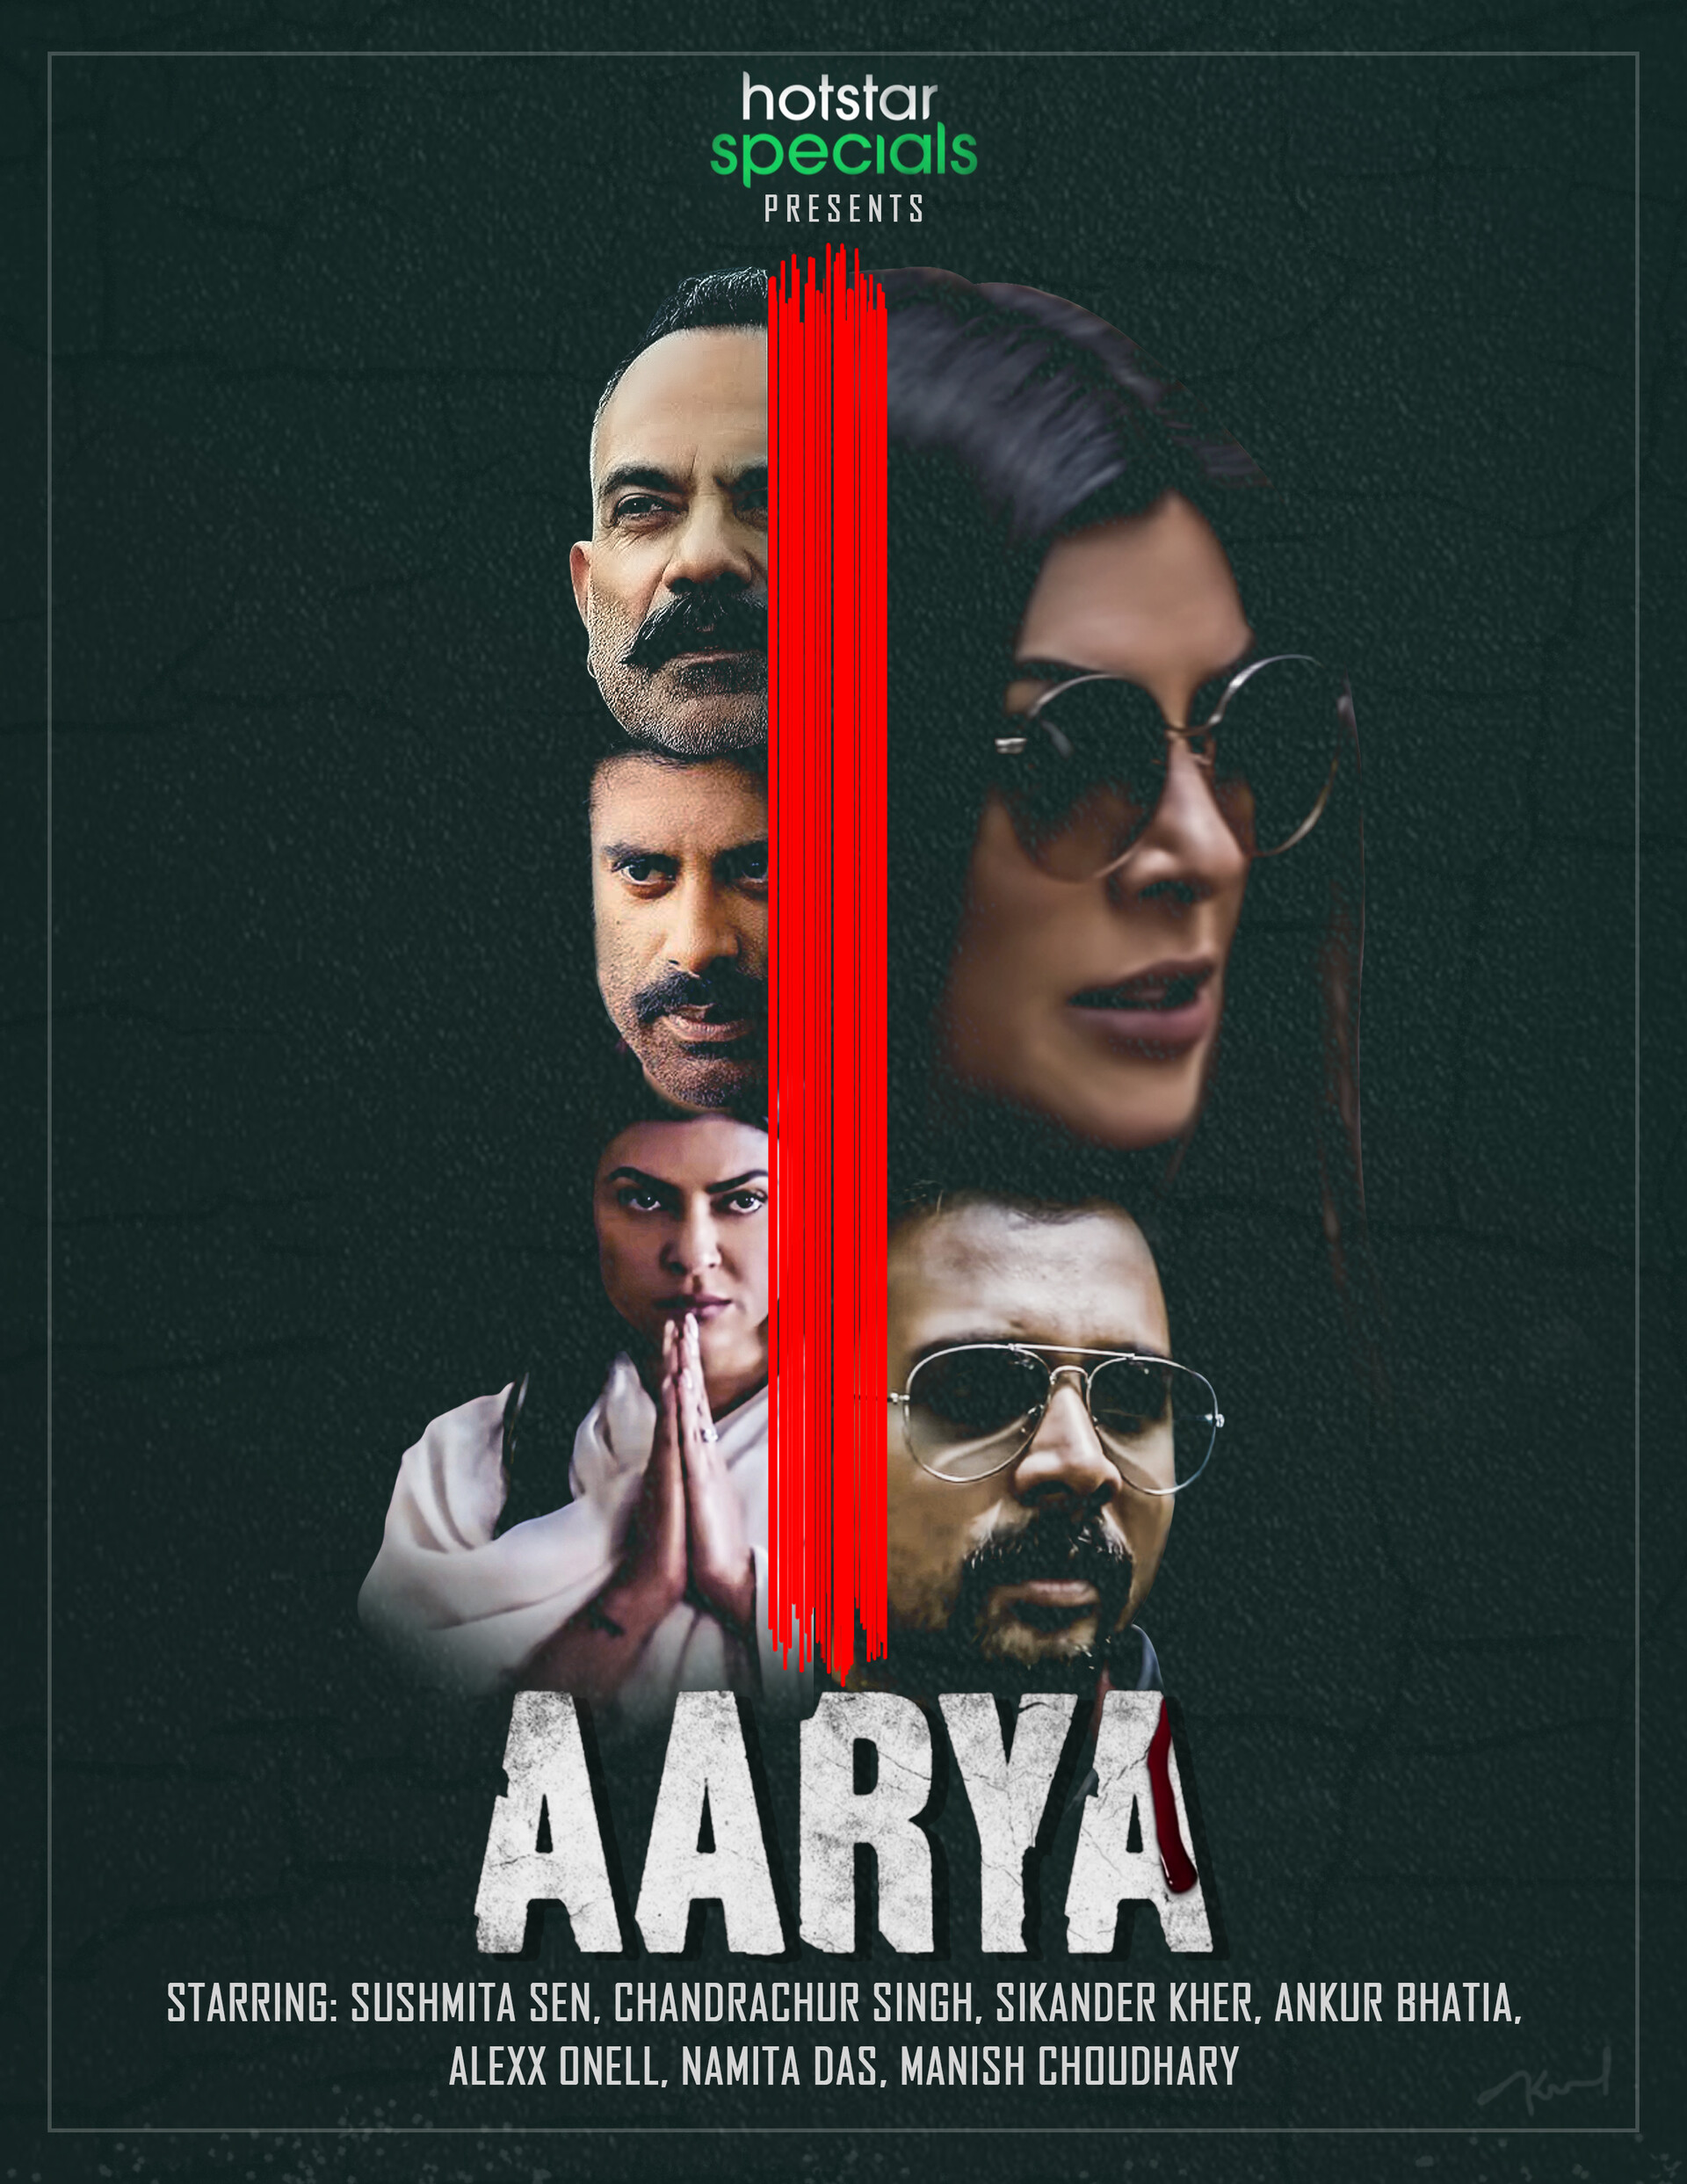 Artstation Aarya Movie Poster Tv Series Hostar Specials Nakul Anand Nakul Anand Free armenian films and tv series, songs, clips, tv programs, broadcasts, tv shows online in high quality. artstation aarya movie poster tv